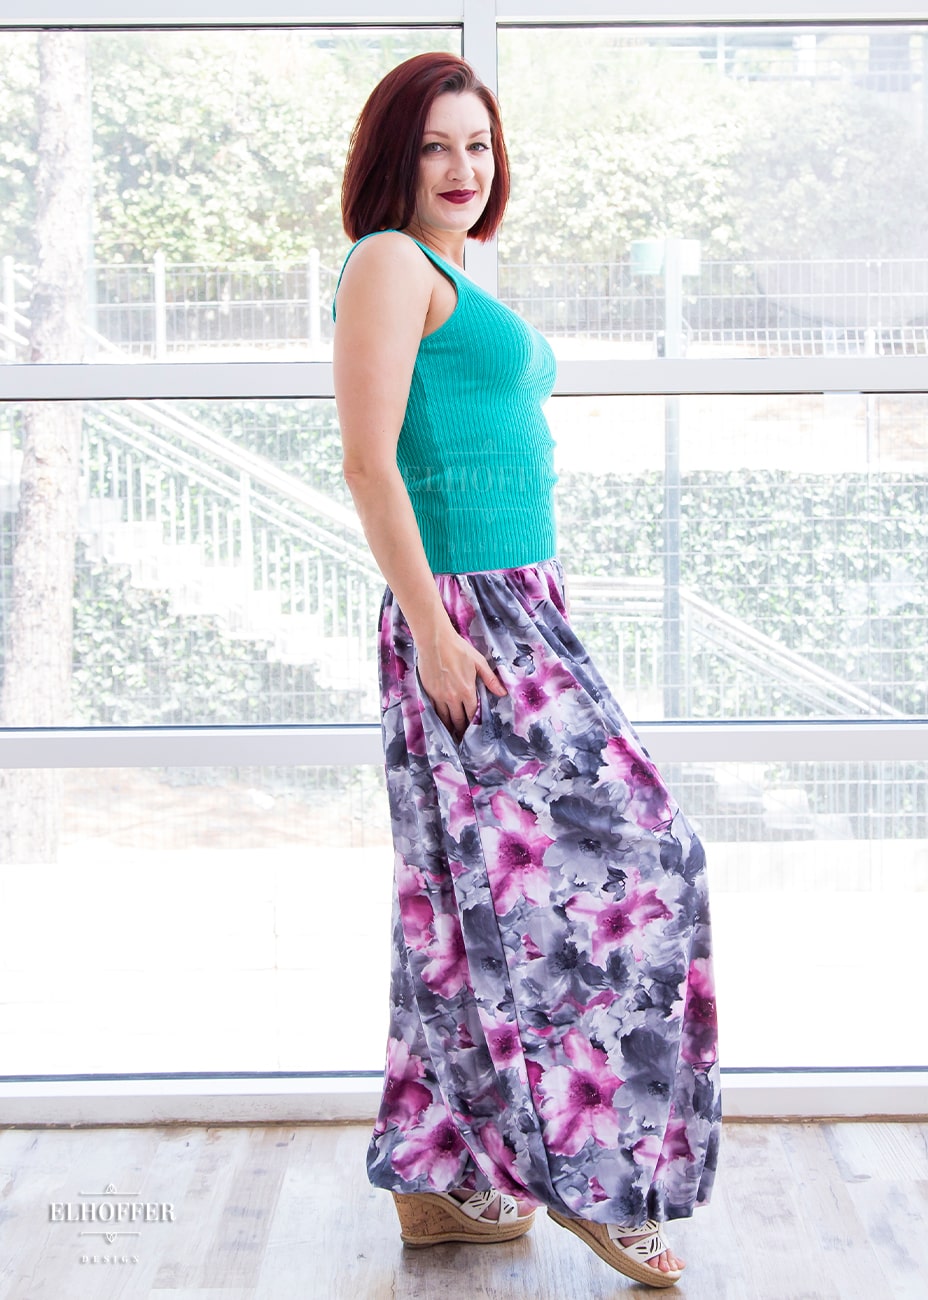 Natalie, a size small fair skinned model with short red hair, is wearing our essential Yasmin pants in the watercolor flowers print. The pants are high waisted full pants gathered at the waist and ankle with a dropped crotch seam. The watercolor flowers print is greyish purple, pink, and white, and gives the impression of a water color painting.